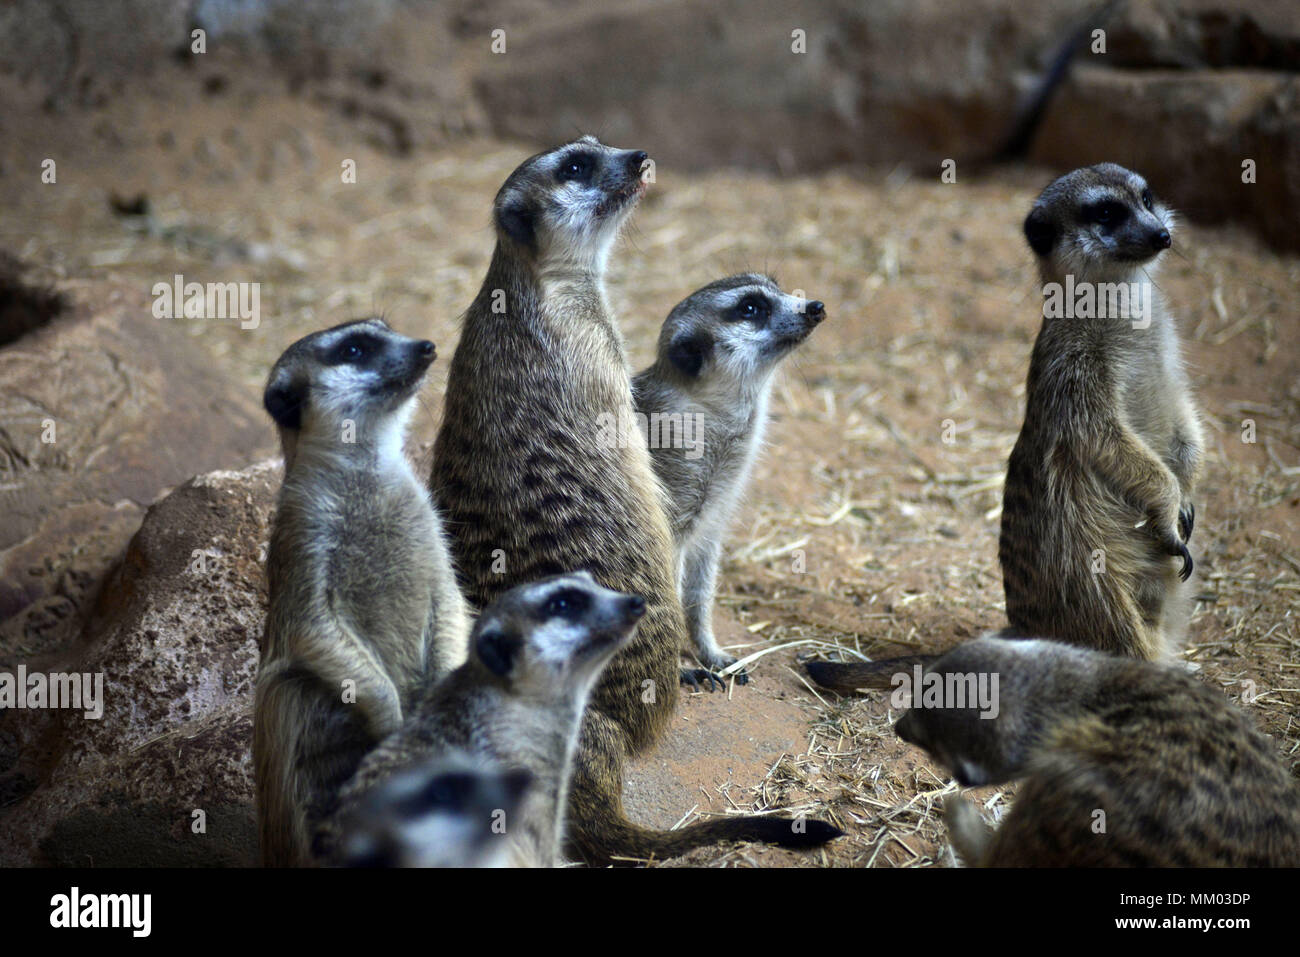 May 9, 2018 - SÃ£O Paulo, SÃ£o Paulo, Brazil - SAO PAULO SP, SP 09/05/2018 SURICIES IN THE AQUARIUM OF SP: Suricates are seen in the Aquarium of SÃ£o Paulo in the South Zone on Wednesday, 9th. The suricates are exclusively diurnal and live in colonies of up to 40 individuals, who construct a complicated system of tunnels underground, where they remain overnight. They have a longevity between 5 and 12 years, reaching up to 15 in captivity. Within the group, the animals take turns in the tasks of guarding and protecting the children of the community. The social system of the suricates is complex Stock Photo